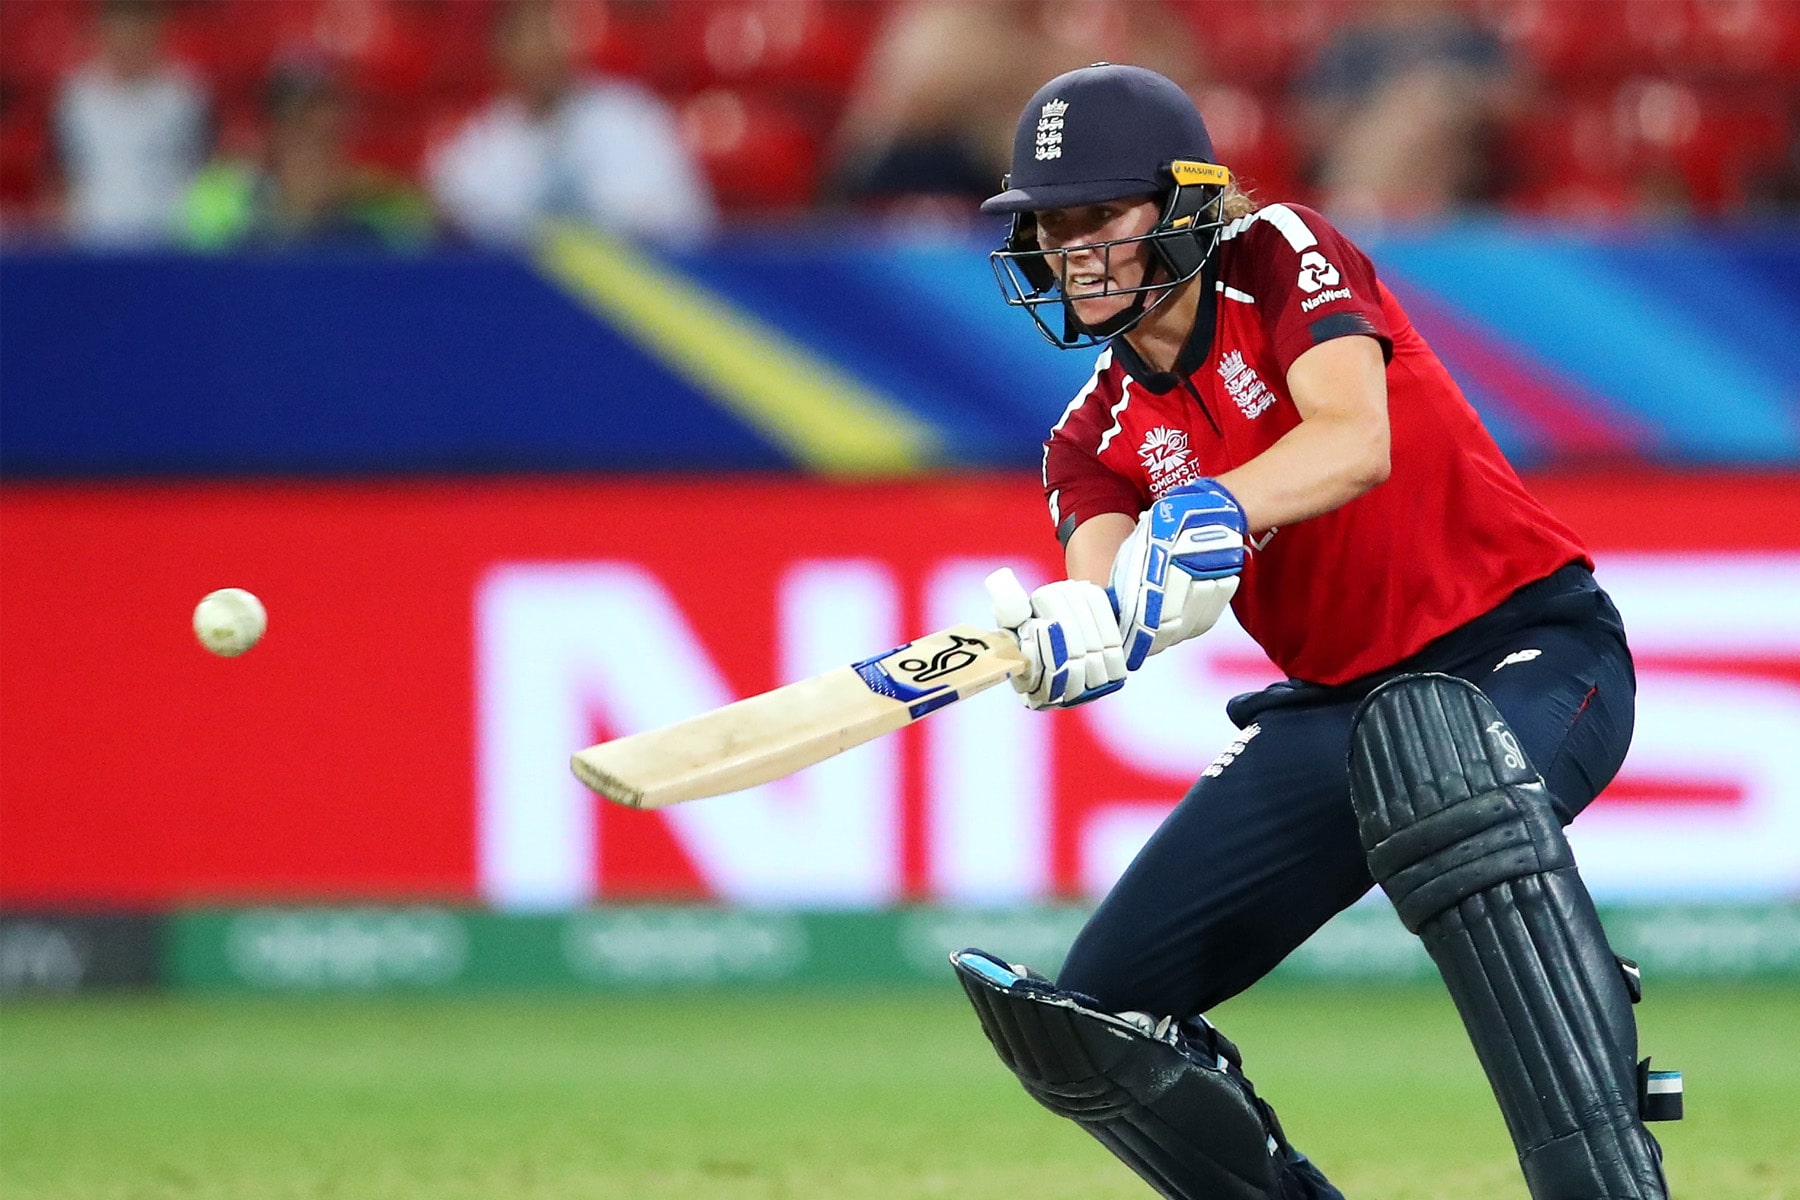 Sciver the double MVP for winter 2019/20